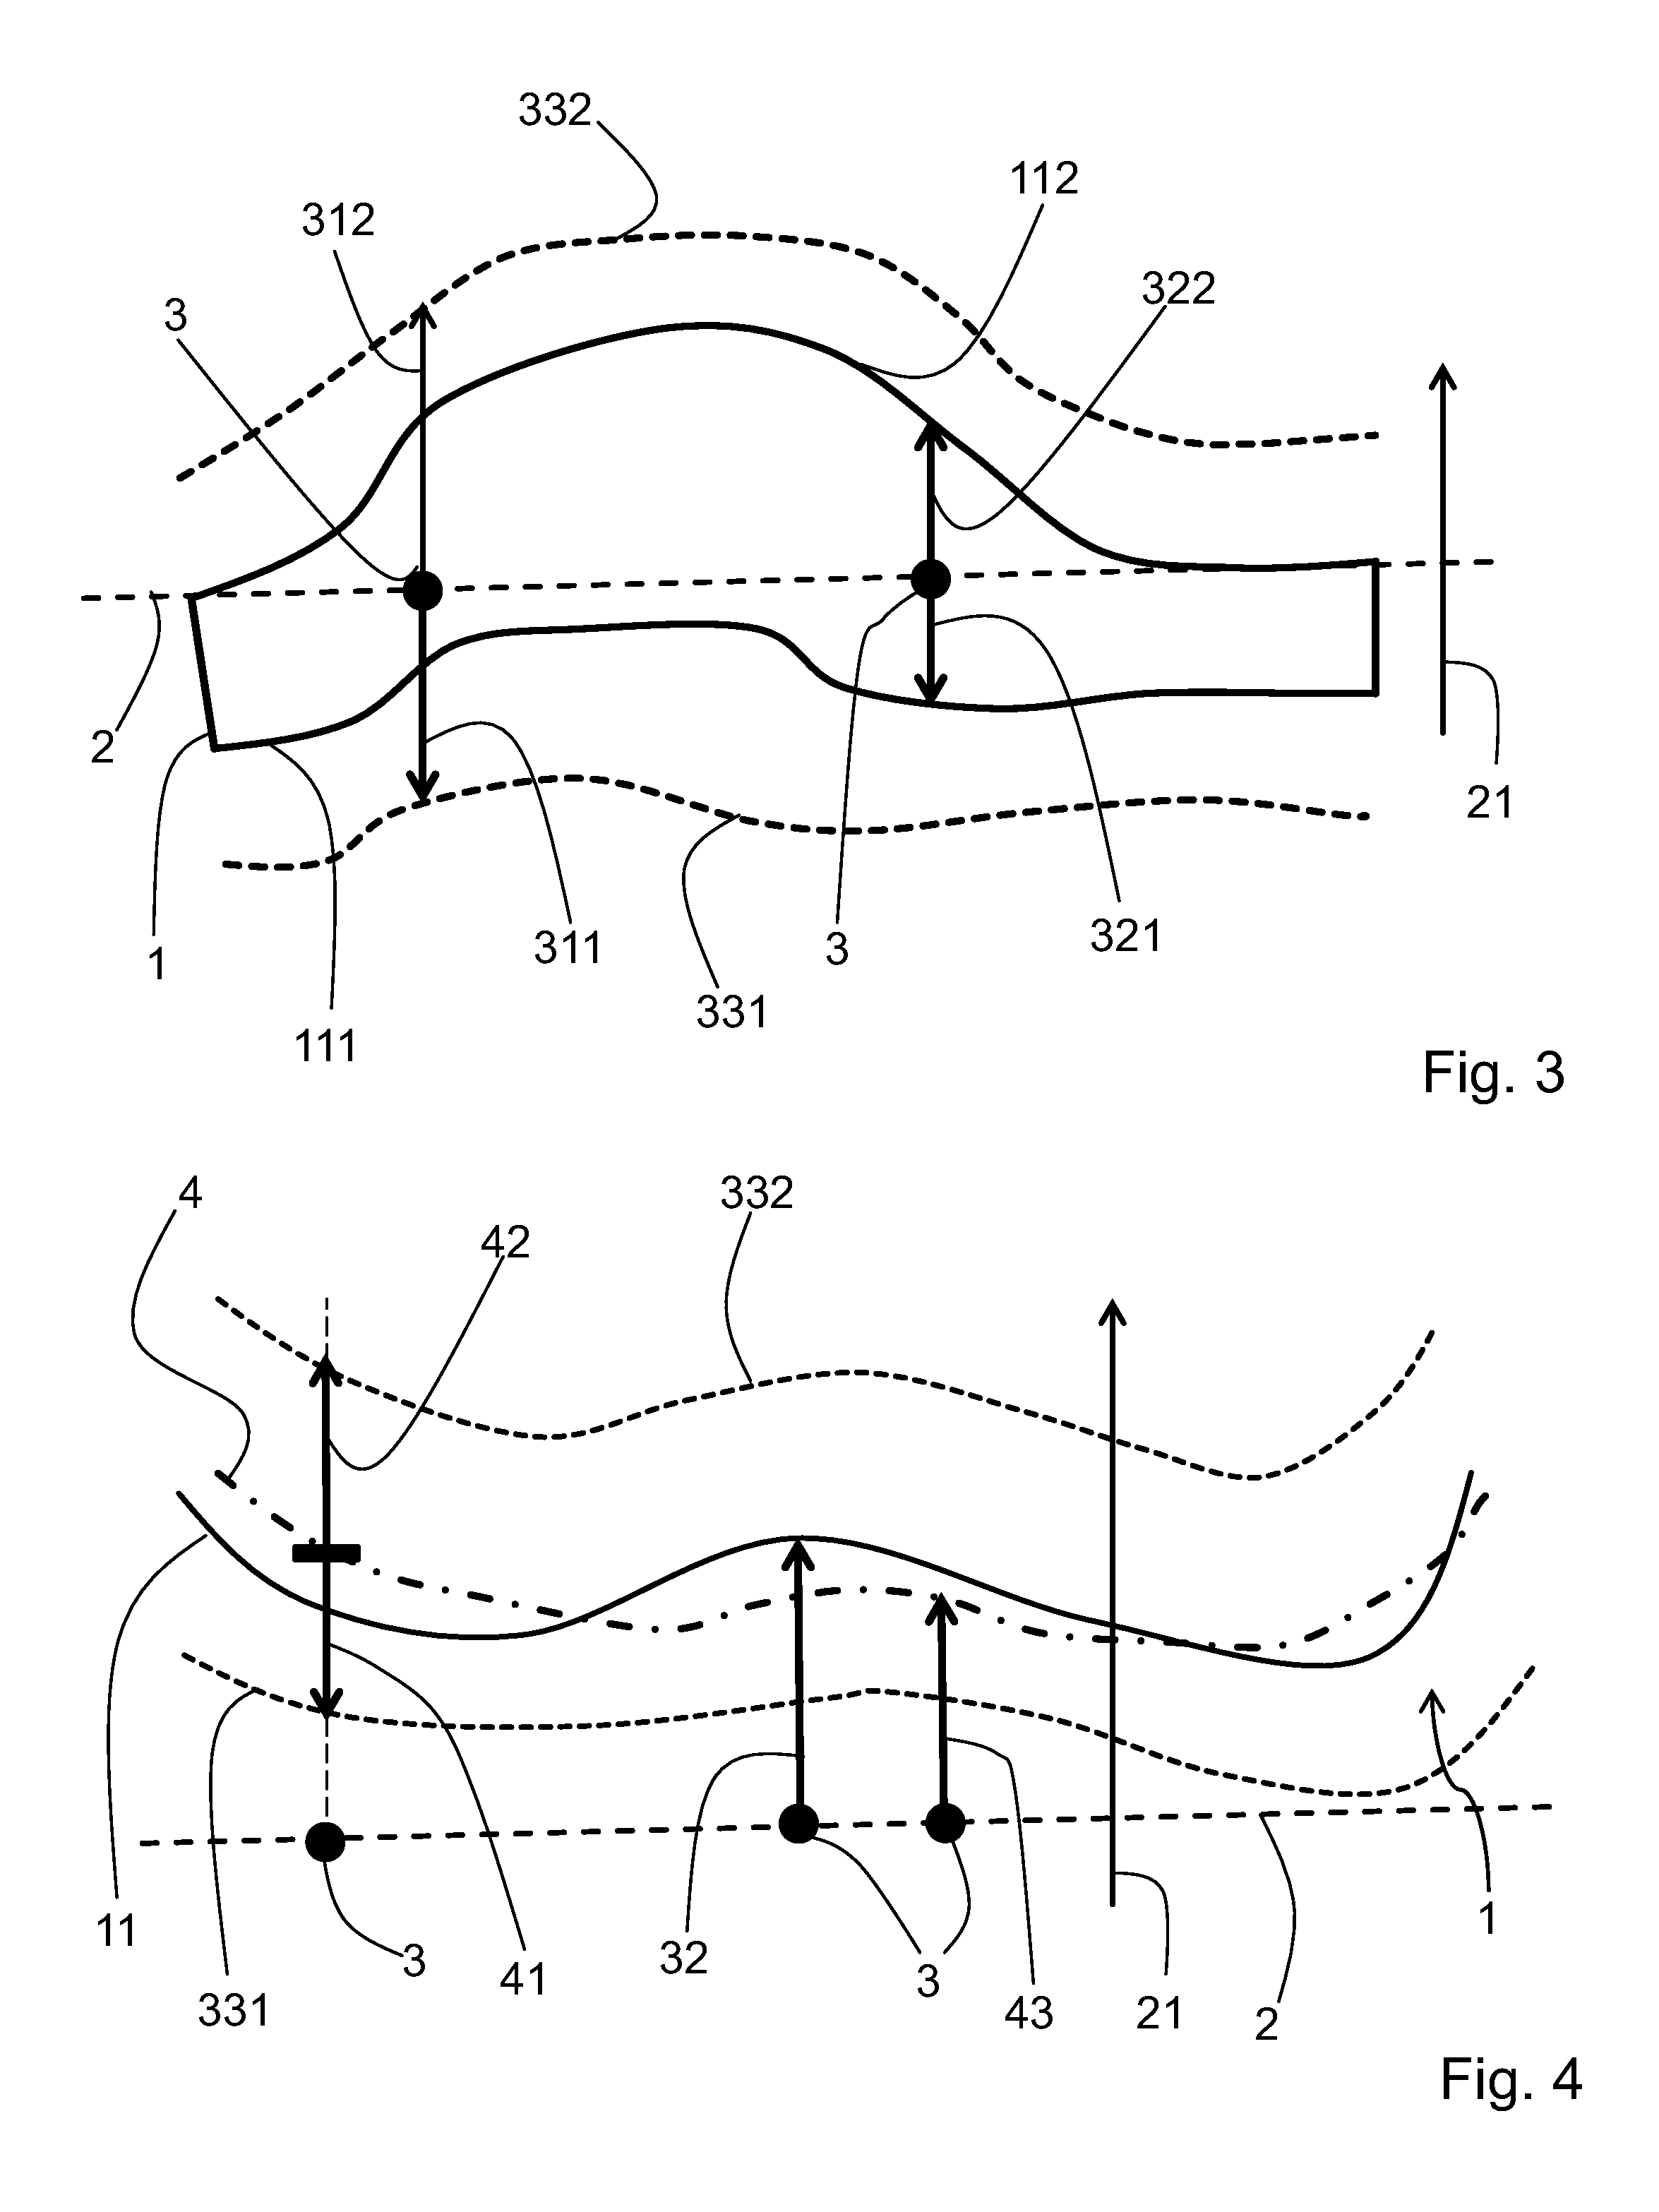 Method for shape classification of an object